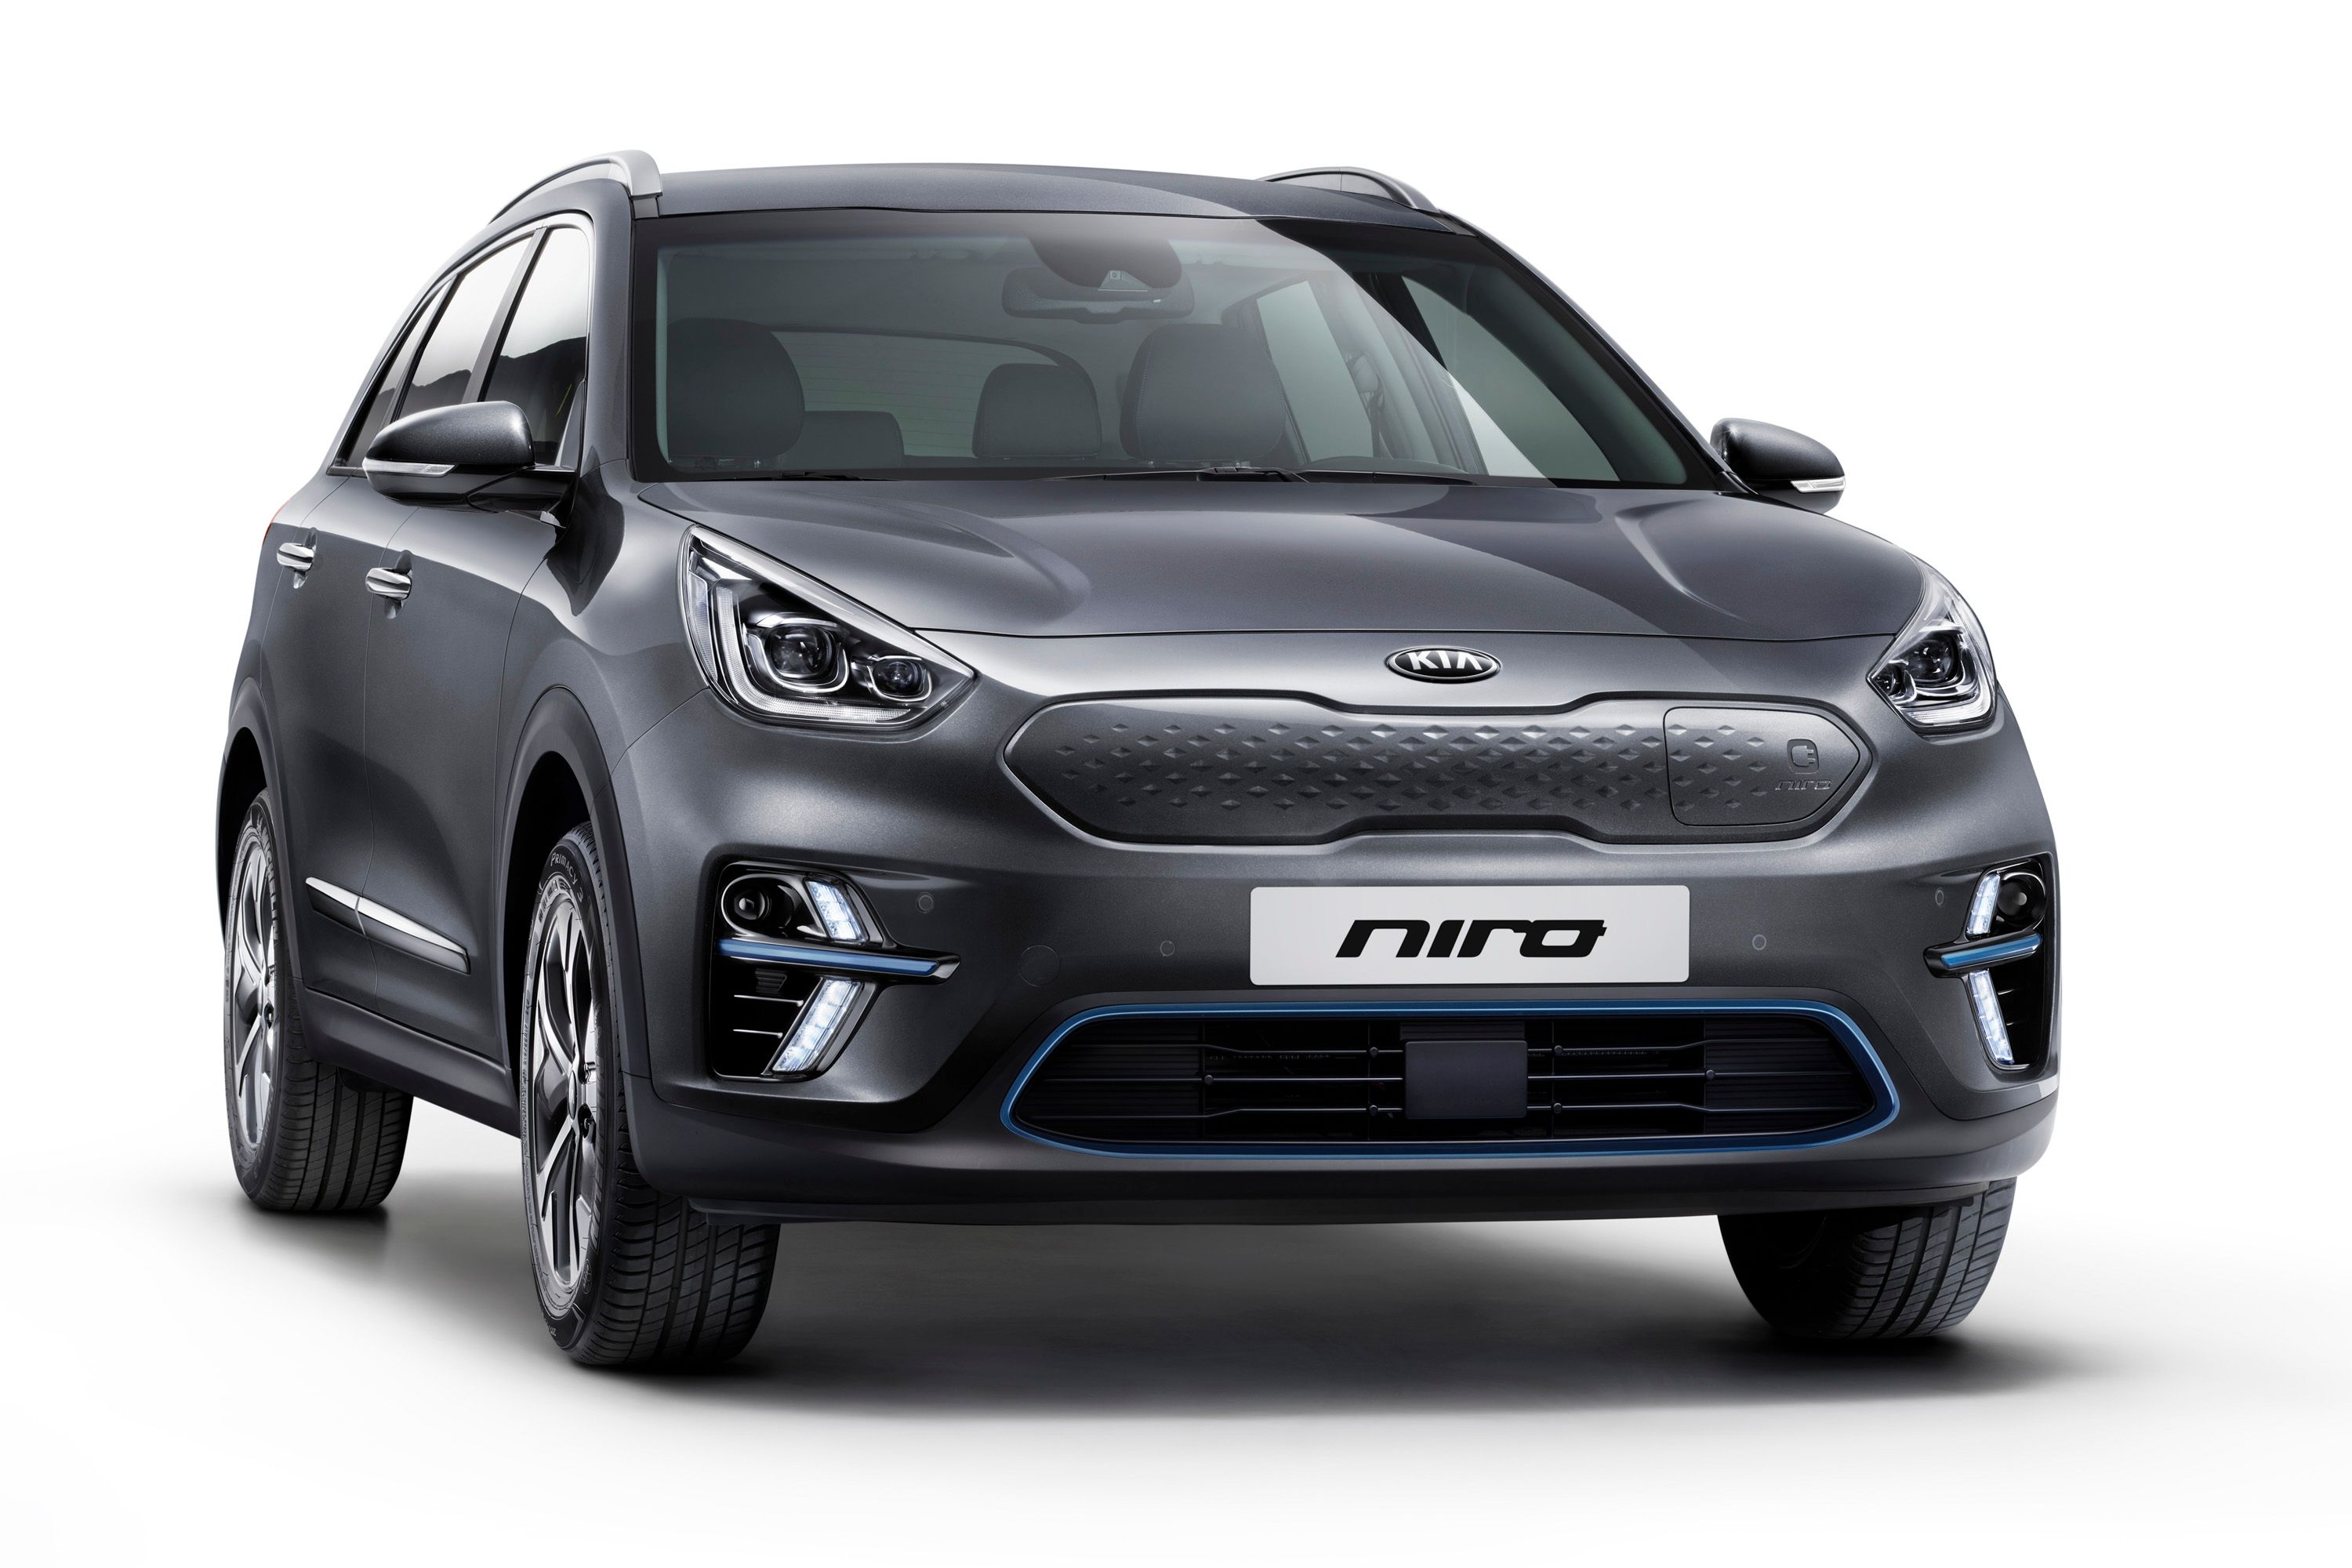 2019 The Kia e-Niro Electric Crossover Has an All-Electric Range of 301 Miles